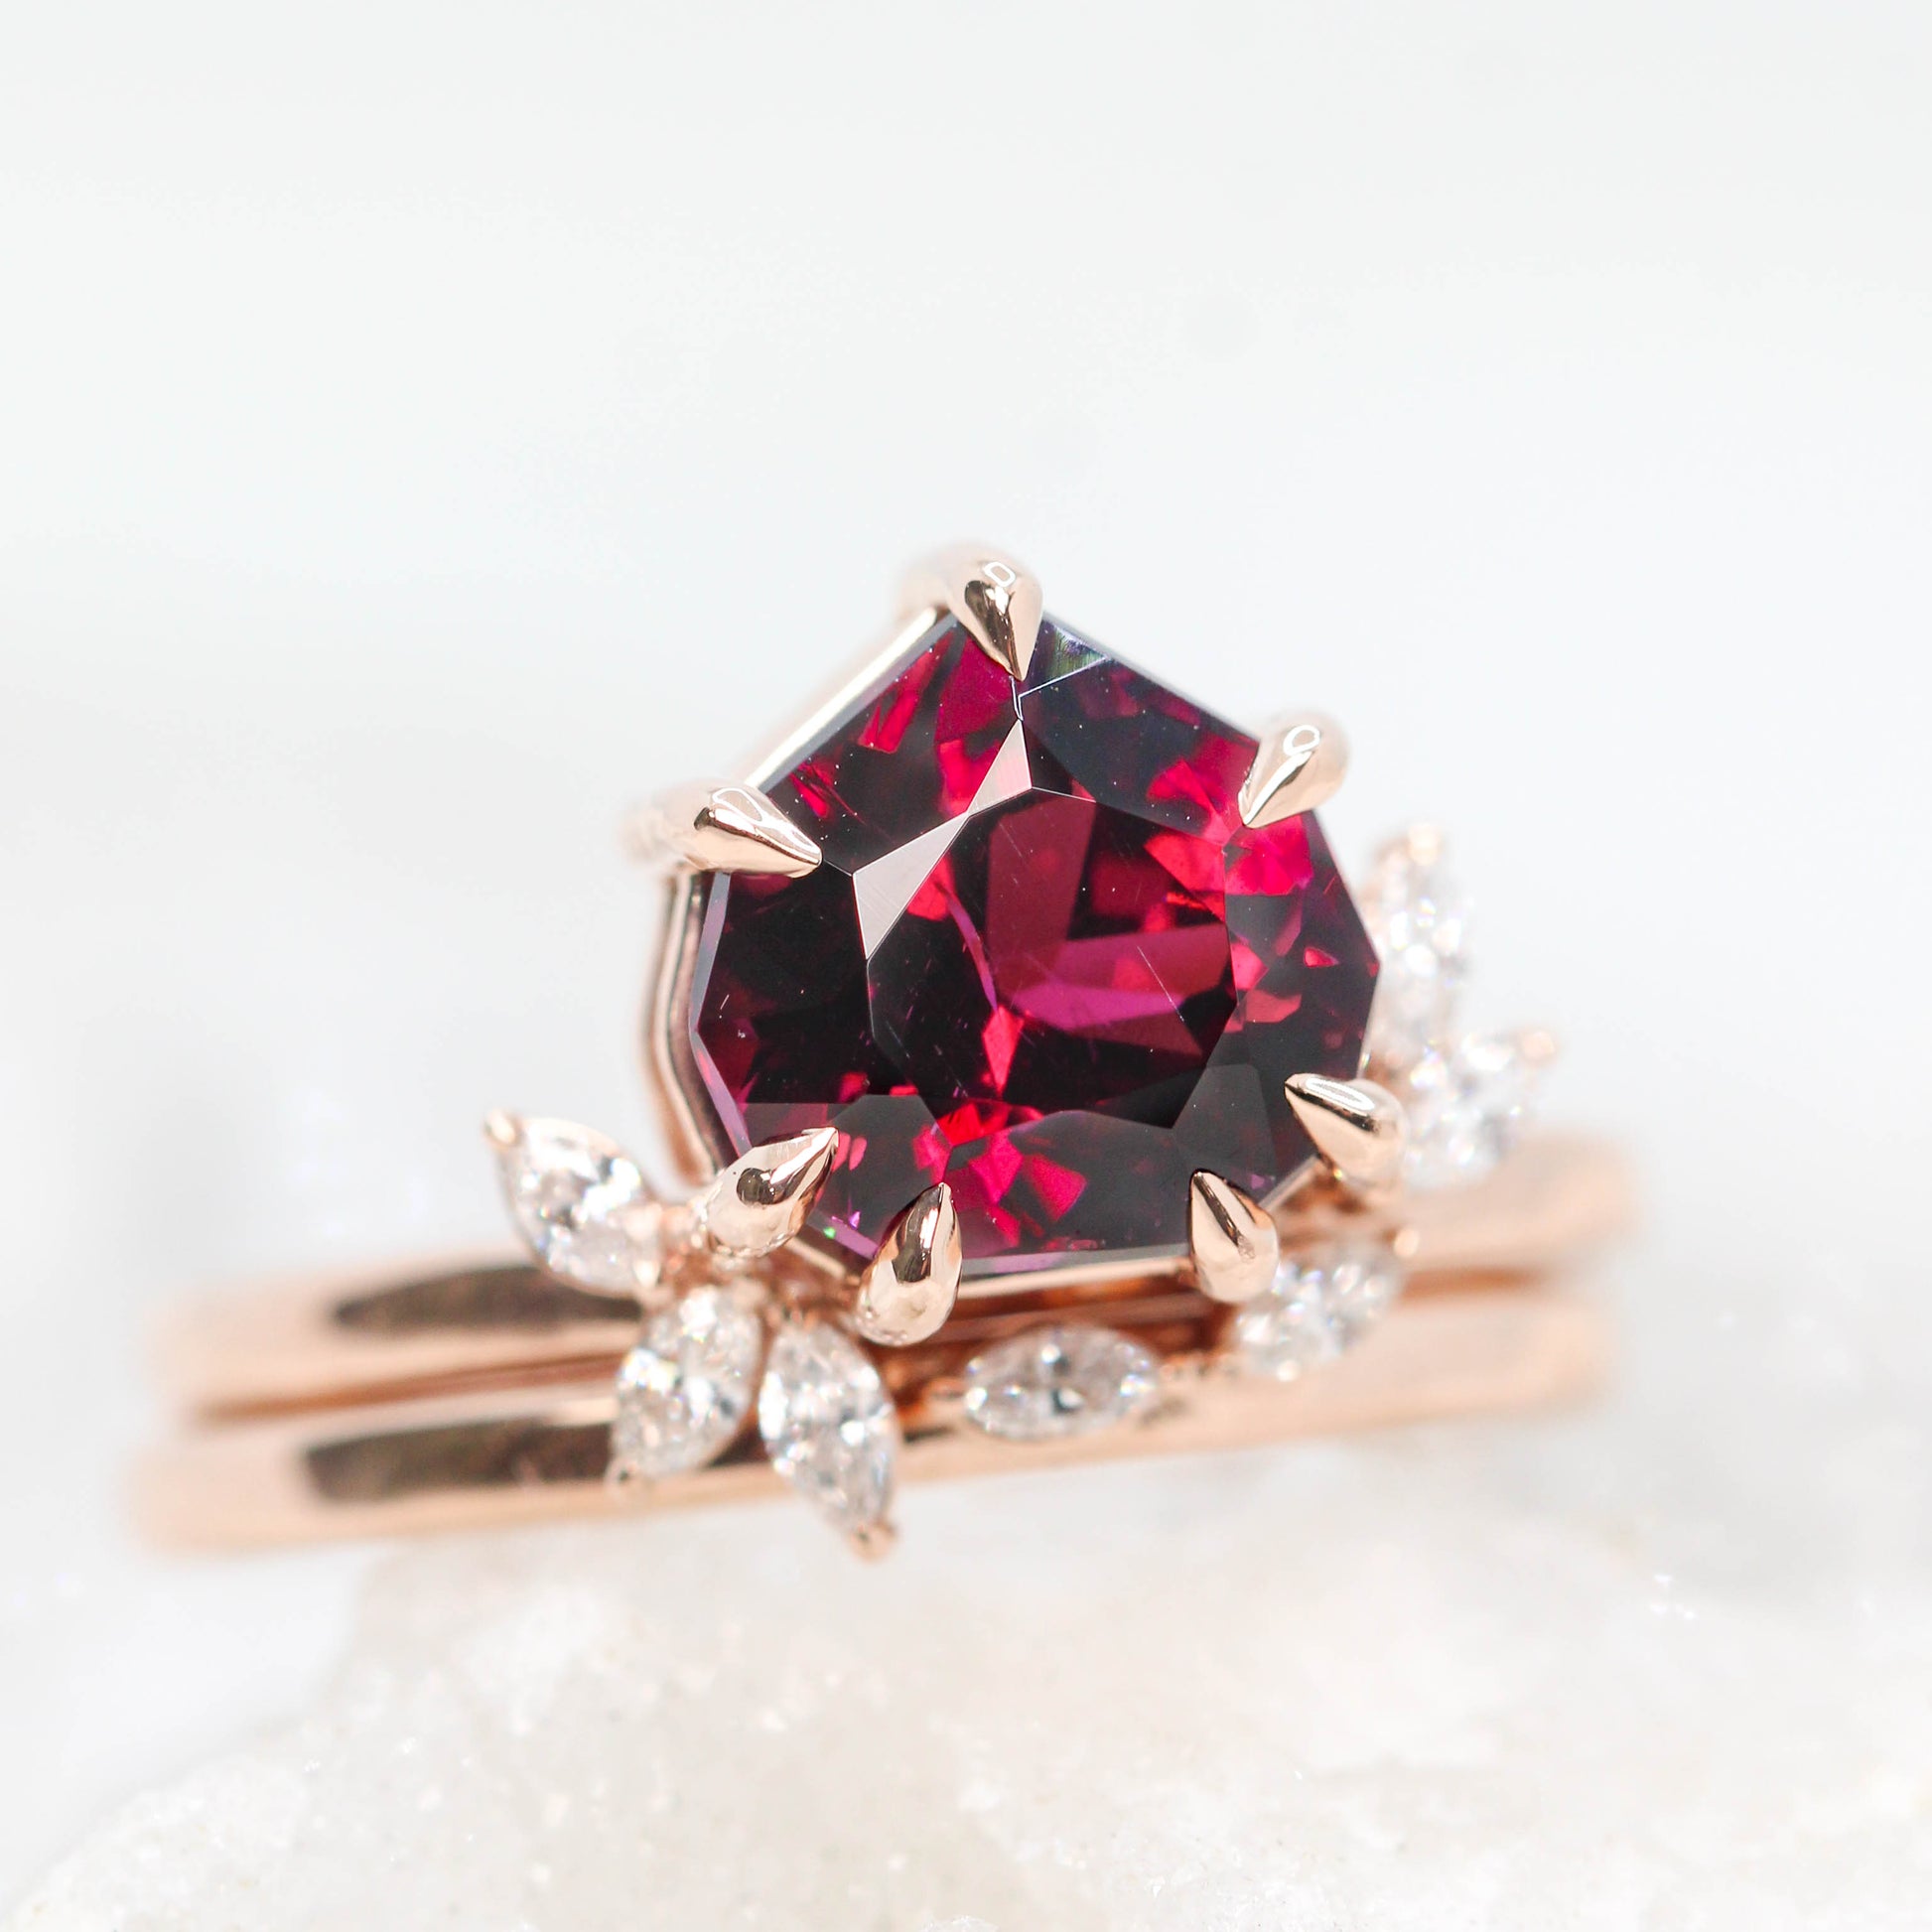 Chantell Ring with a 4.04 Carat Geometric Rhodolite Garnet and White Accent Diamonds in 14k Rose Gold with Matching Band - Ready to Size and Ship - Midwinter Co. Alternative Bridal Rings and Modern Fine Jewelry